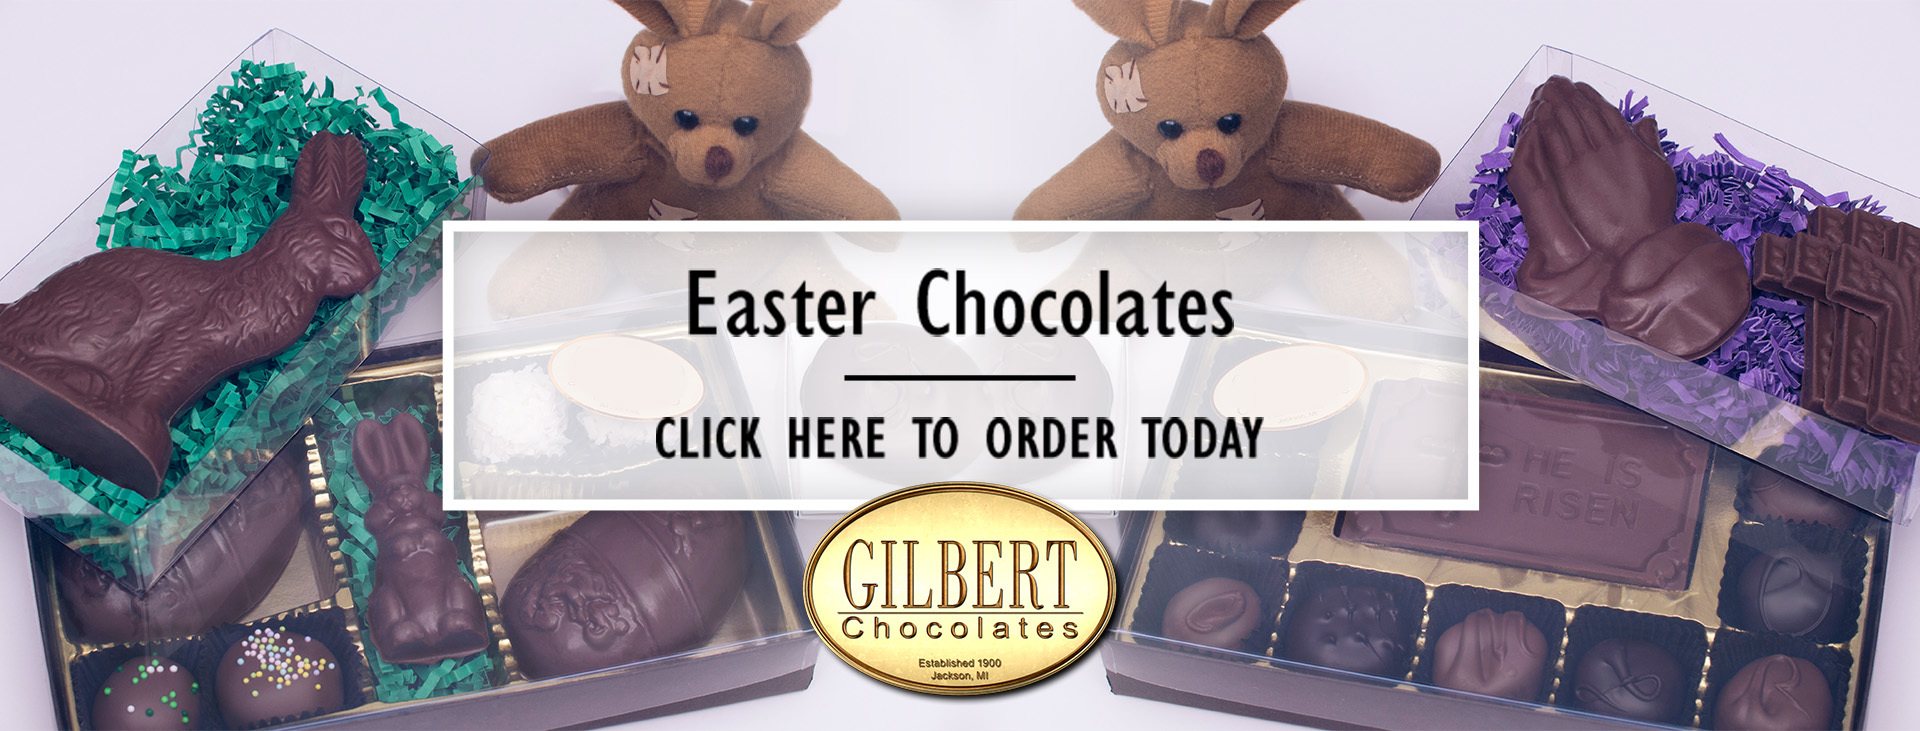 Gilbert Chocolates Easter Candy marketing banner